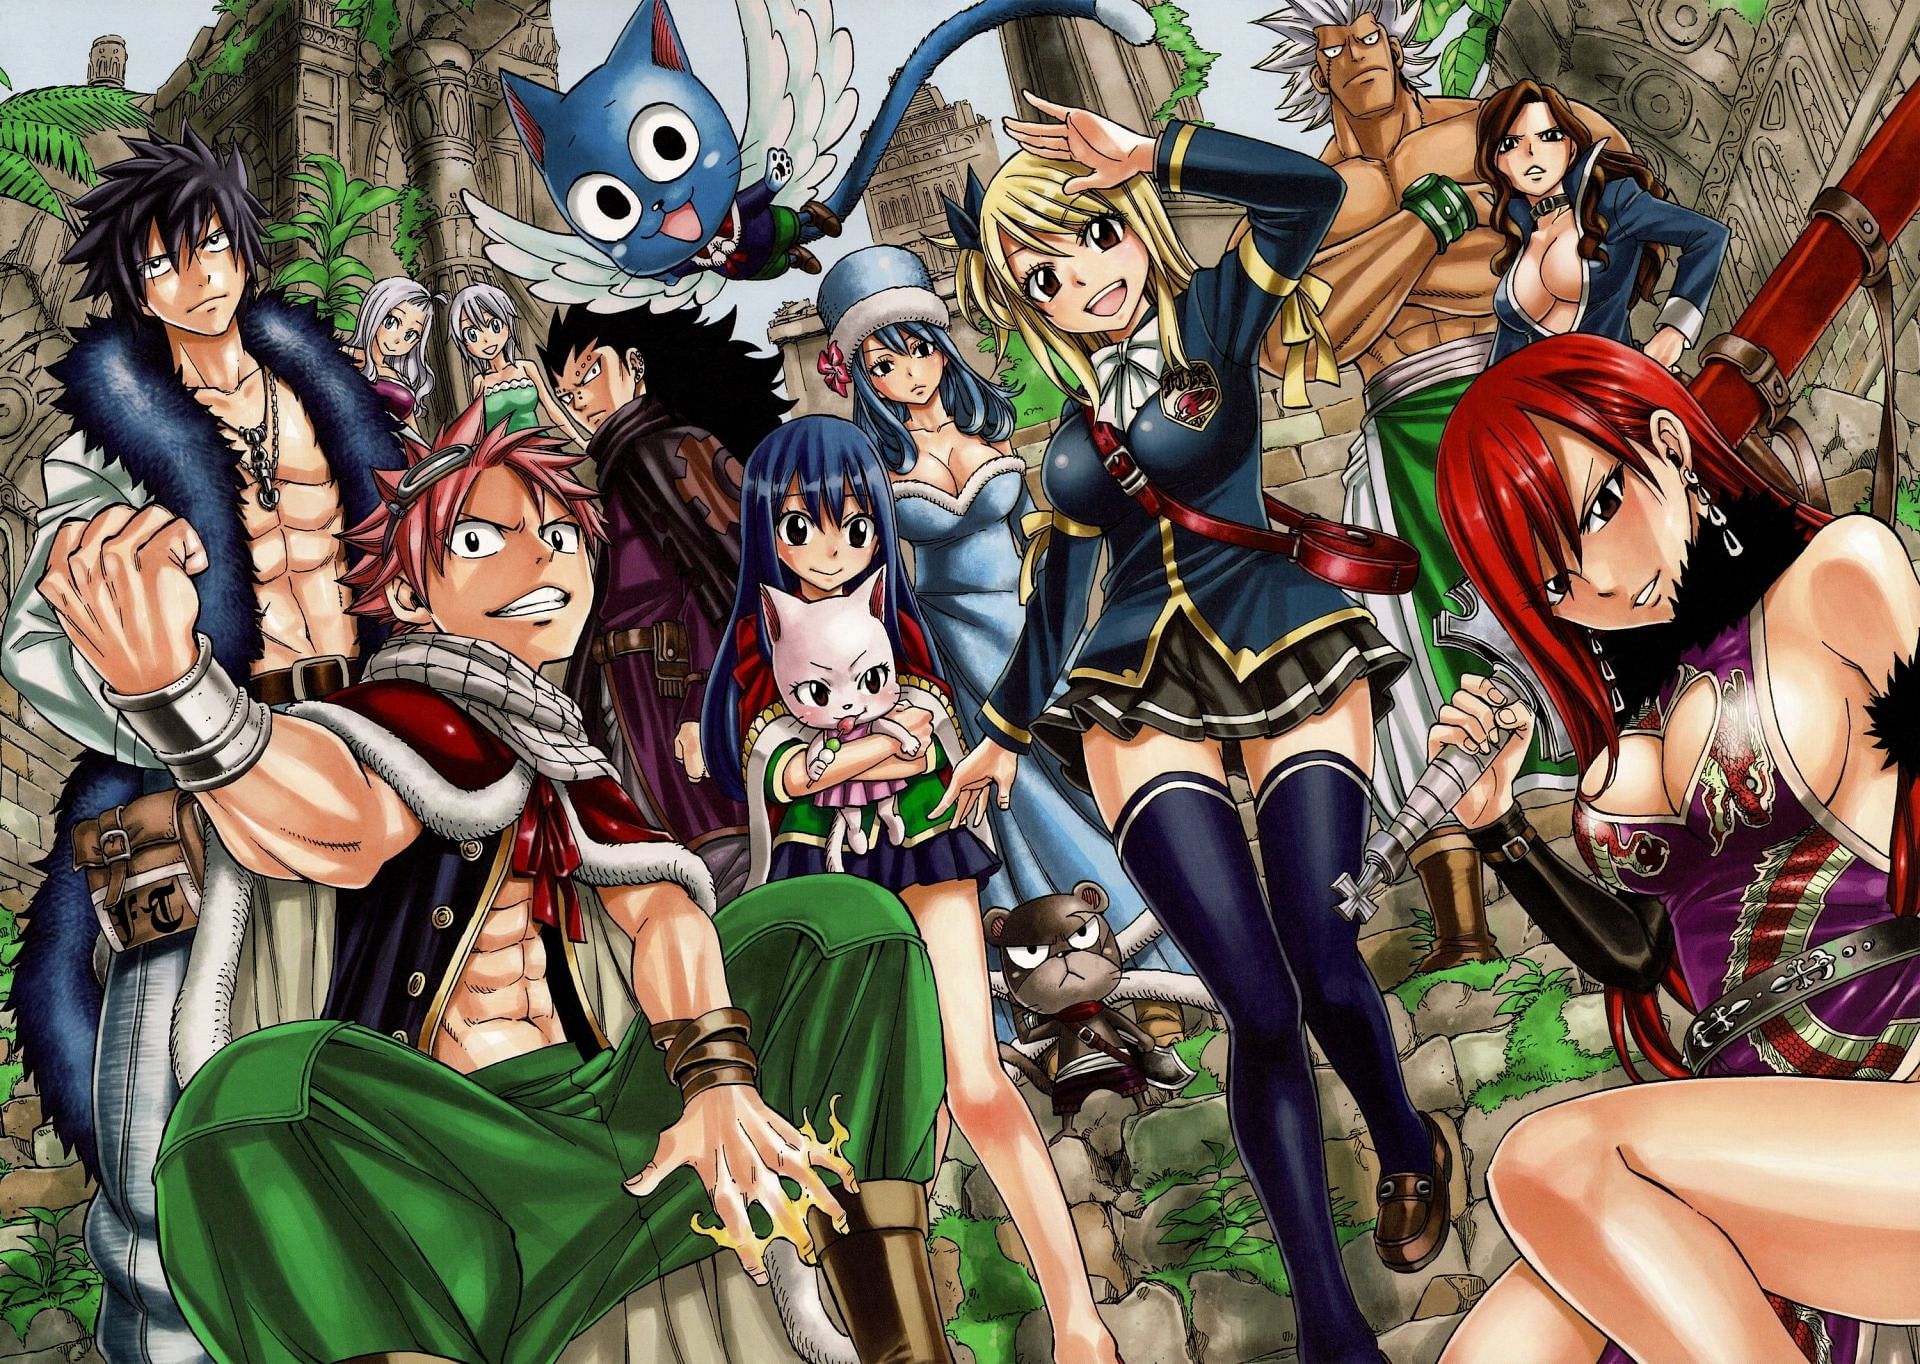 10 strongest spells in Fairy Tail, ranked